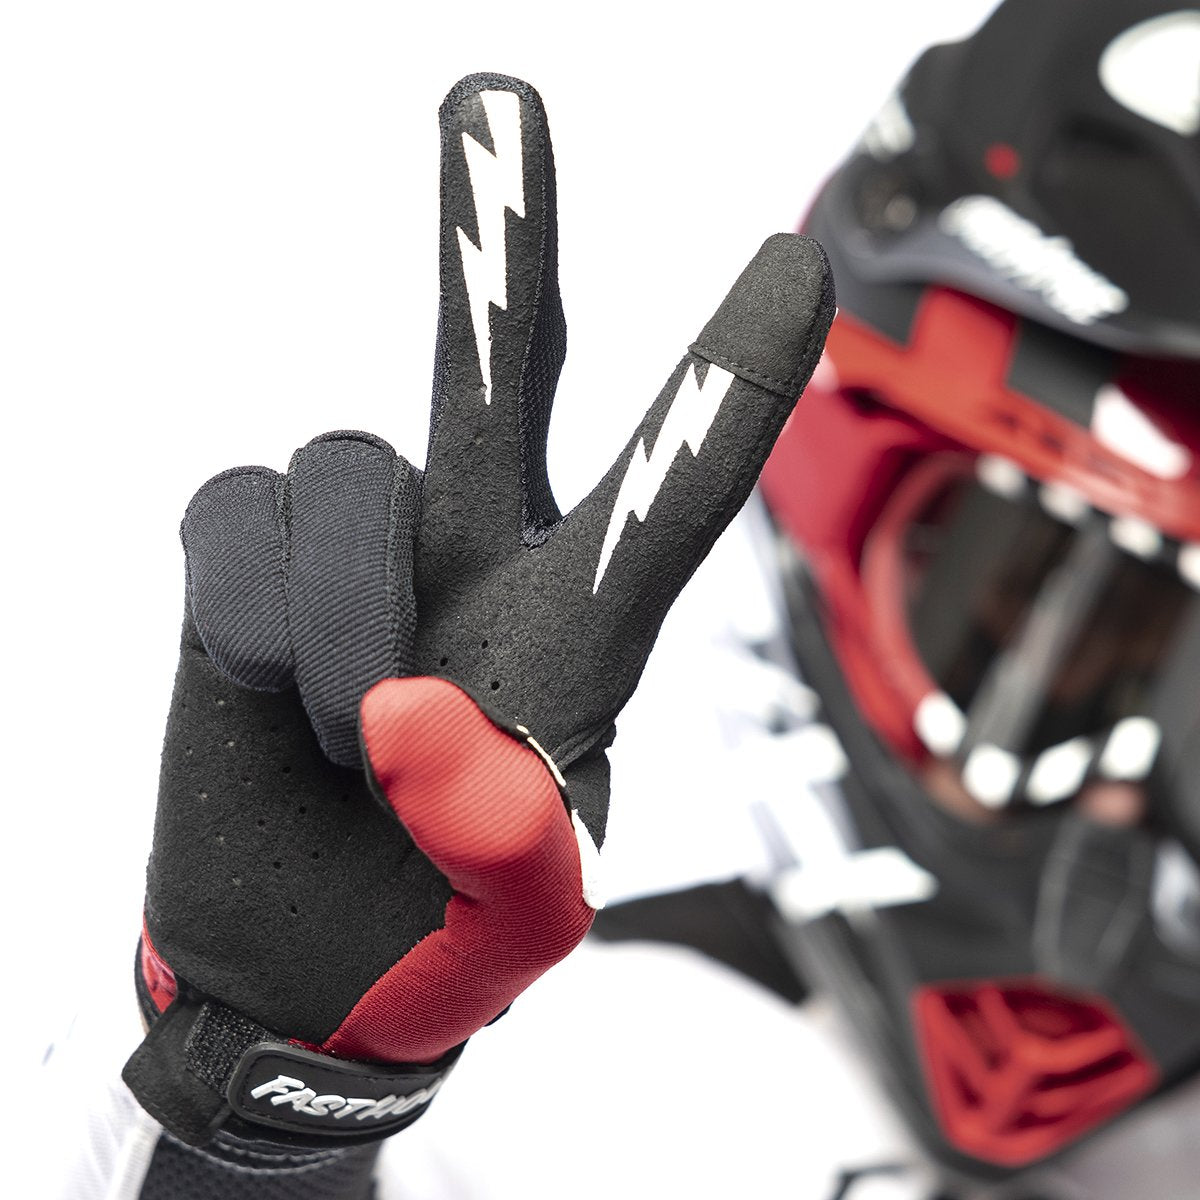 Speed Style Remnant Glove - Red/Black